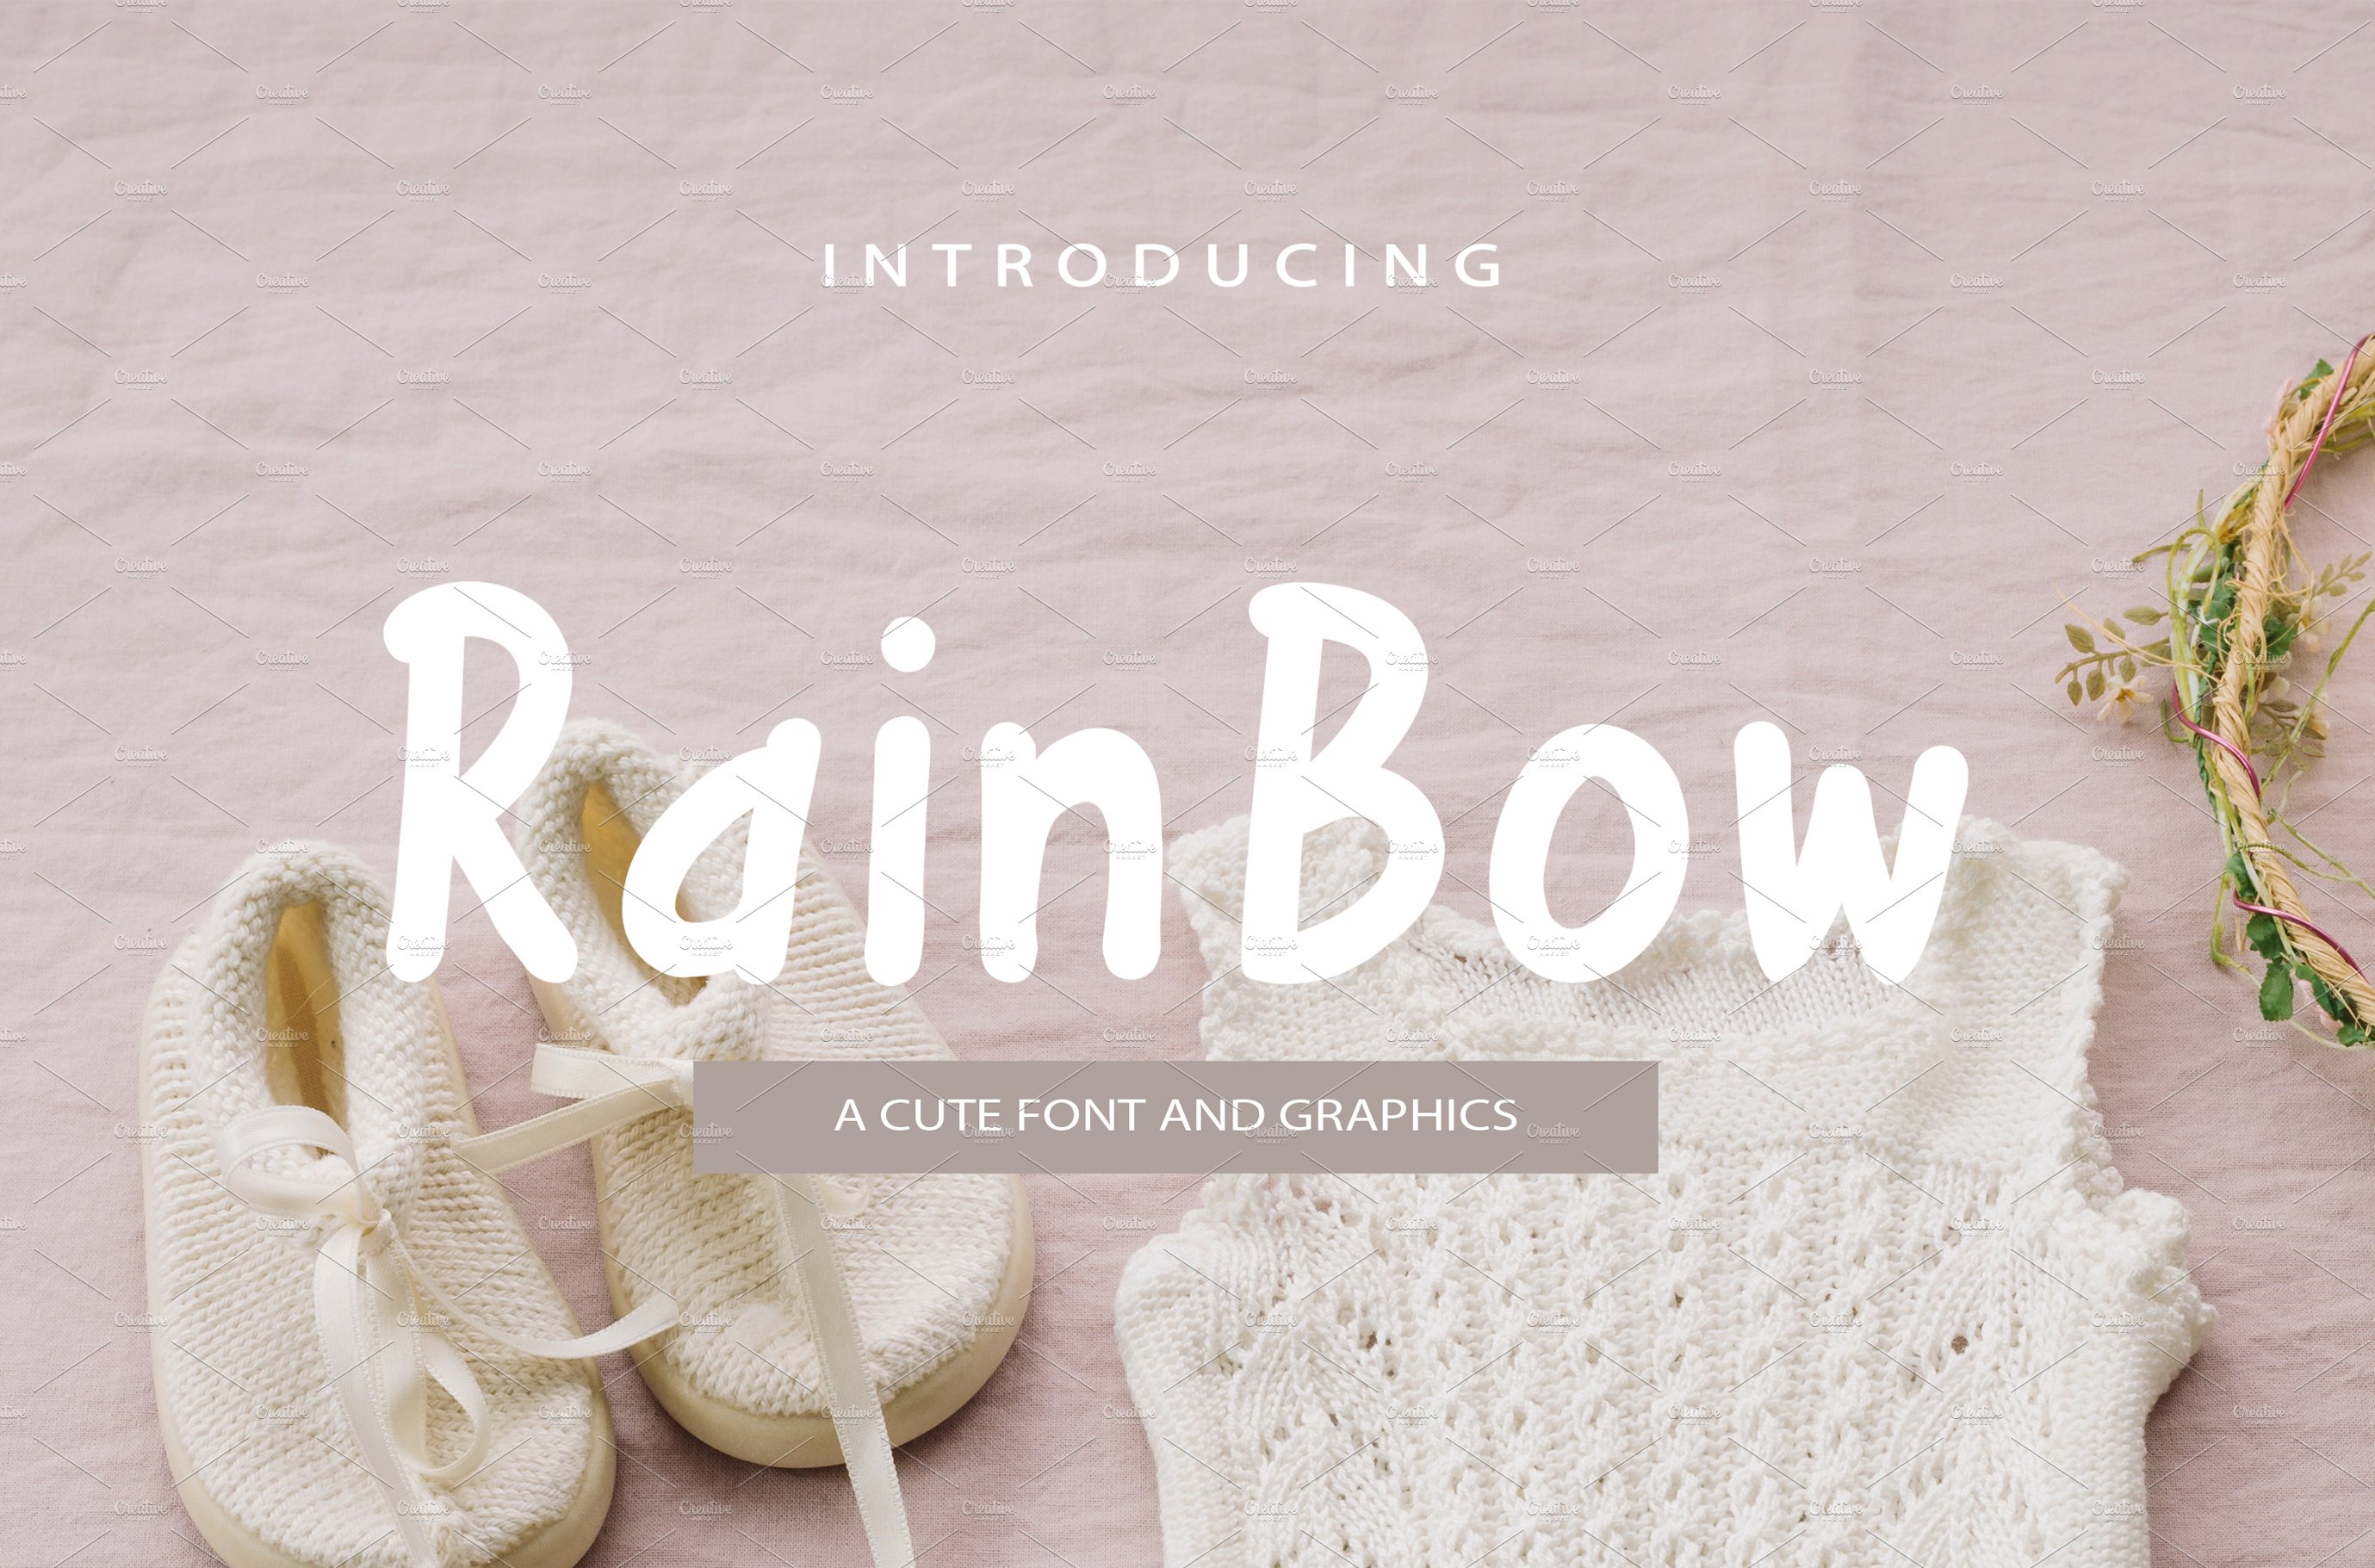 Rainbow Font and Graphics cover image.